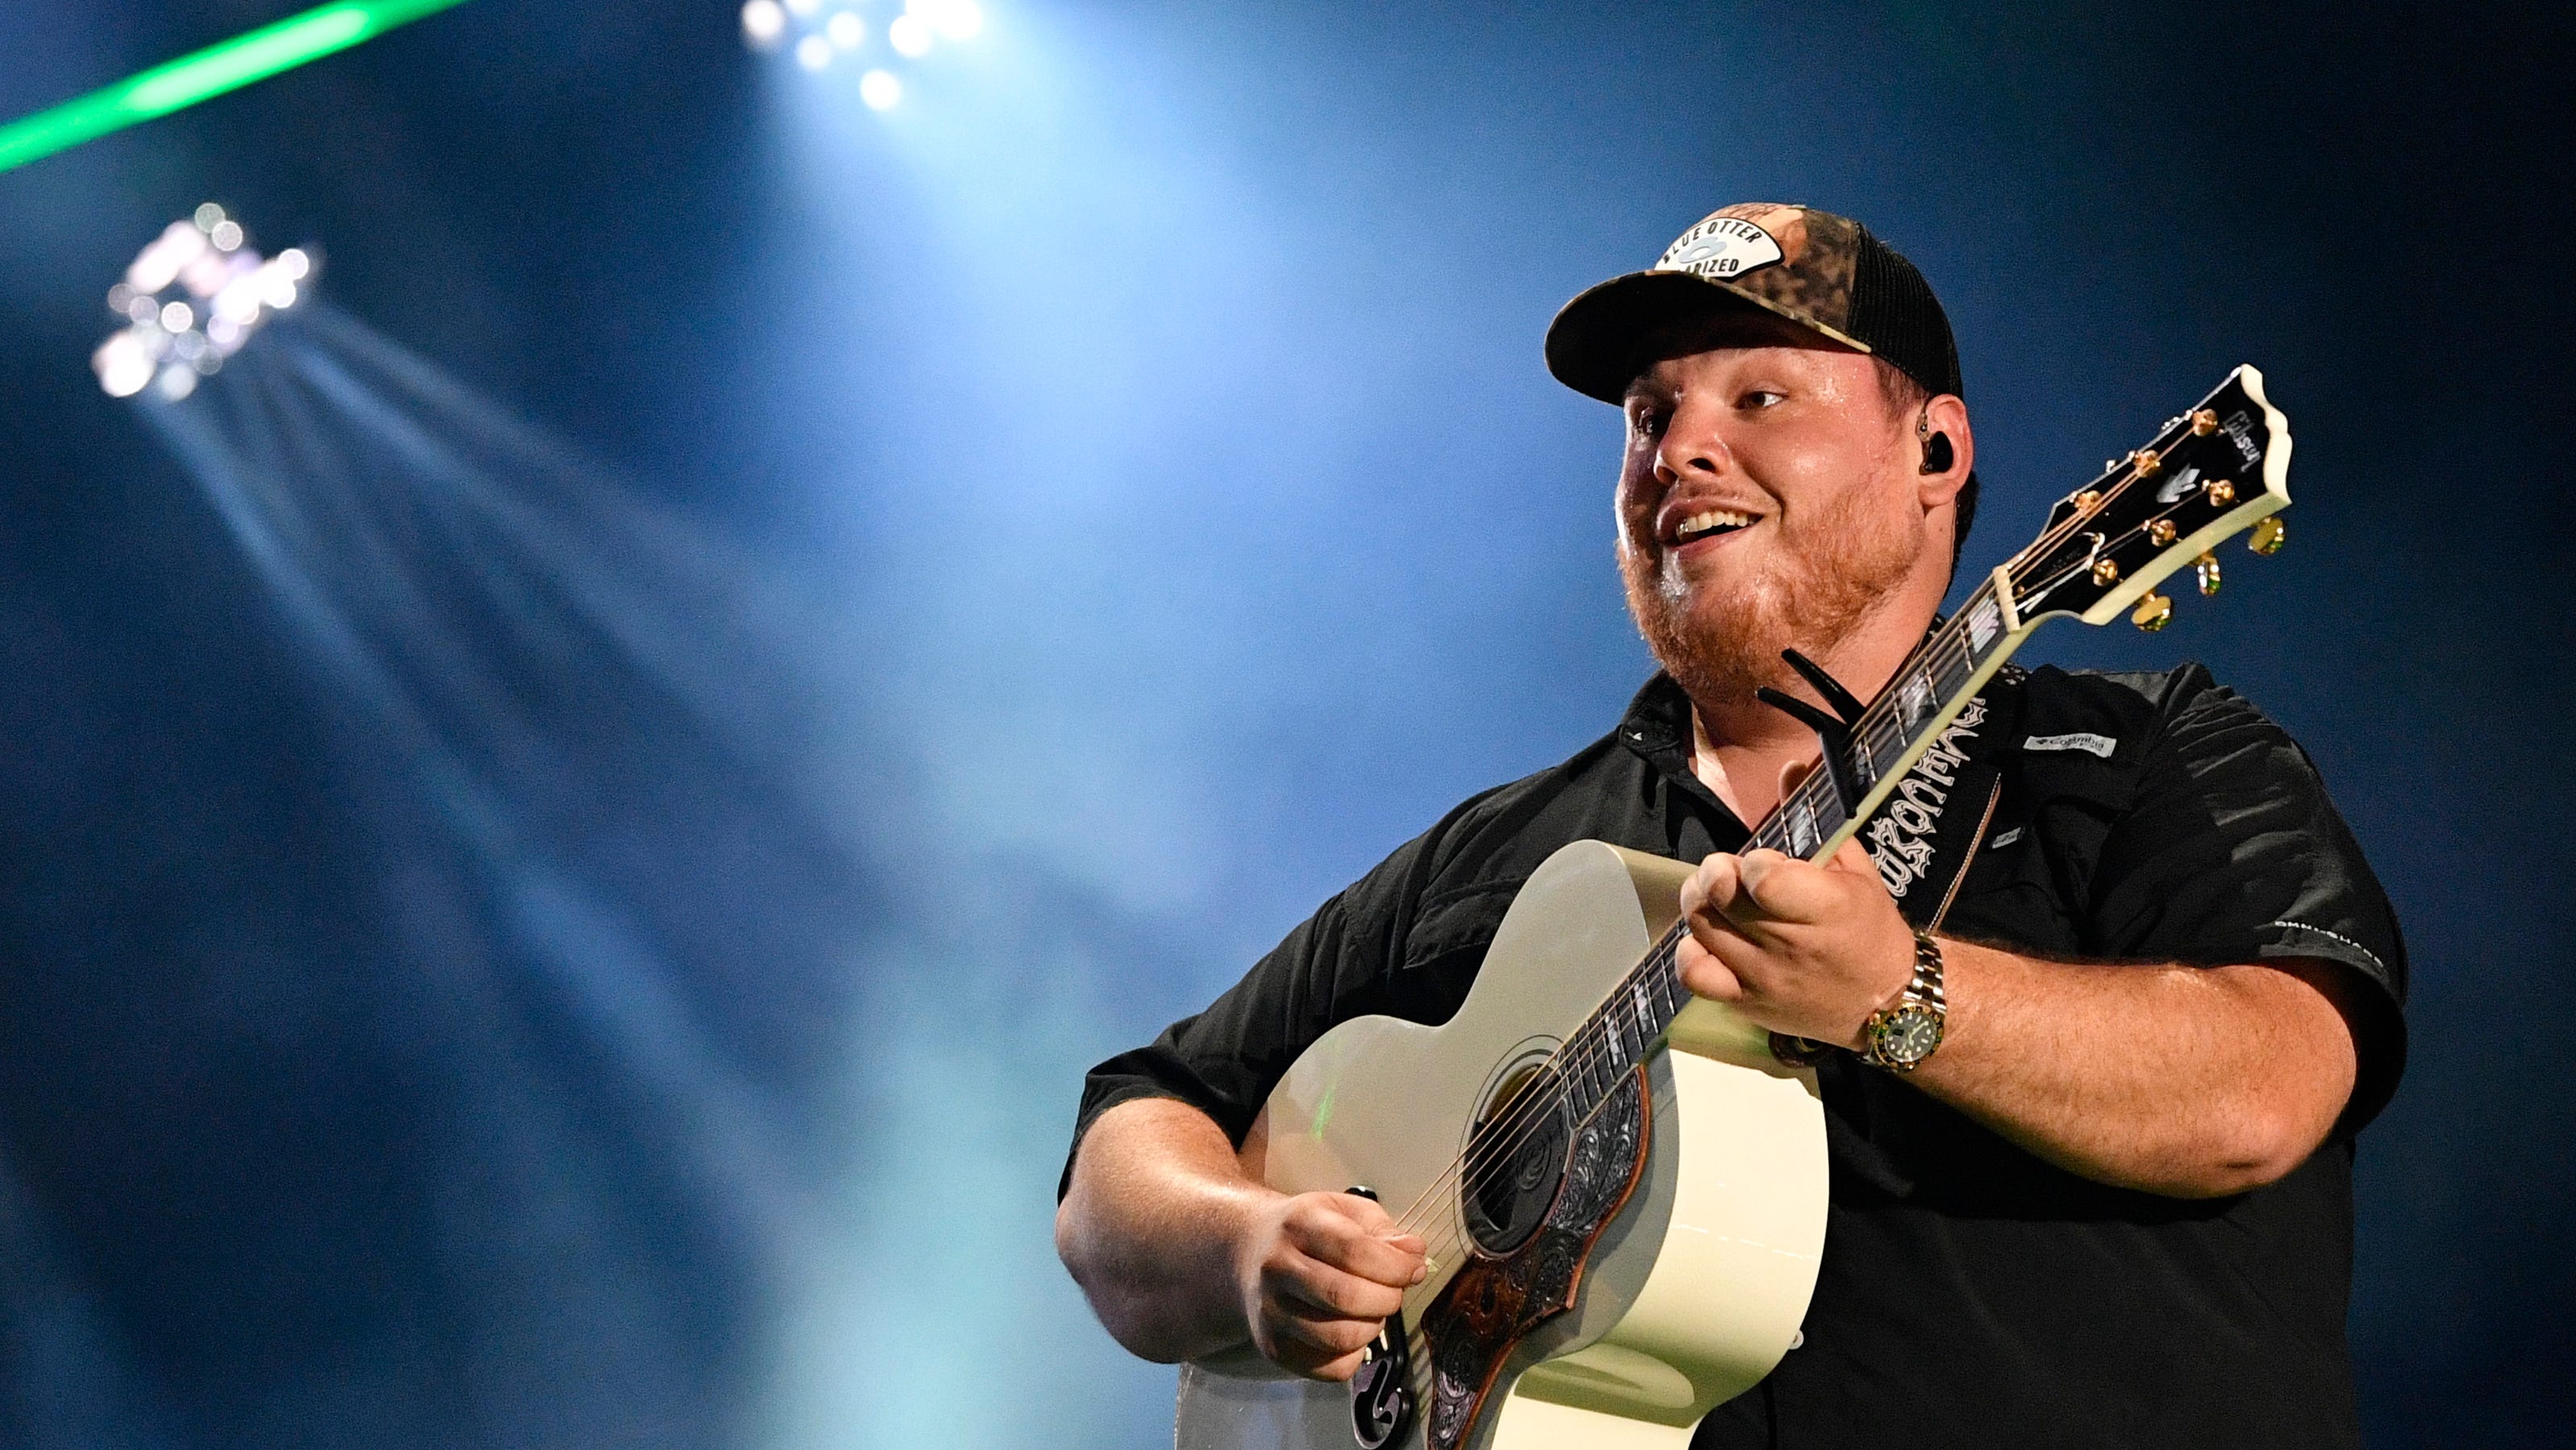 Luke Combs is crushing album sales and streams in 2019, report says